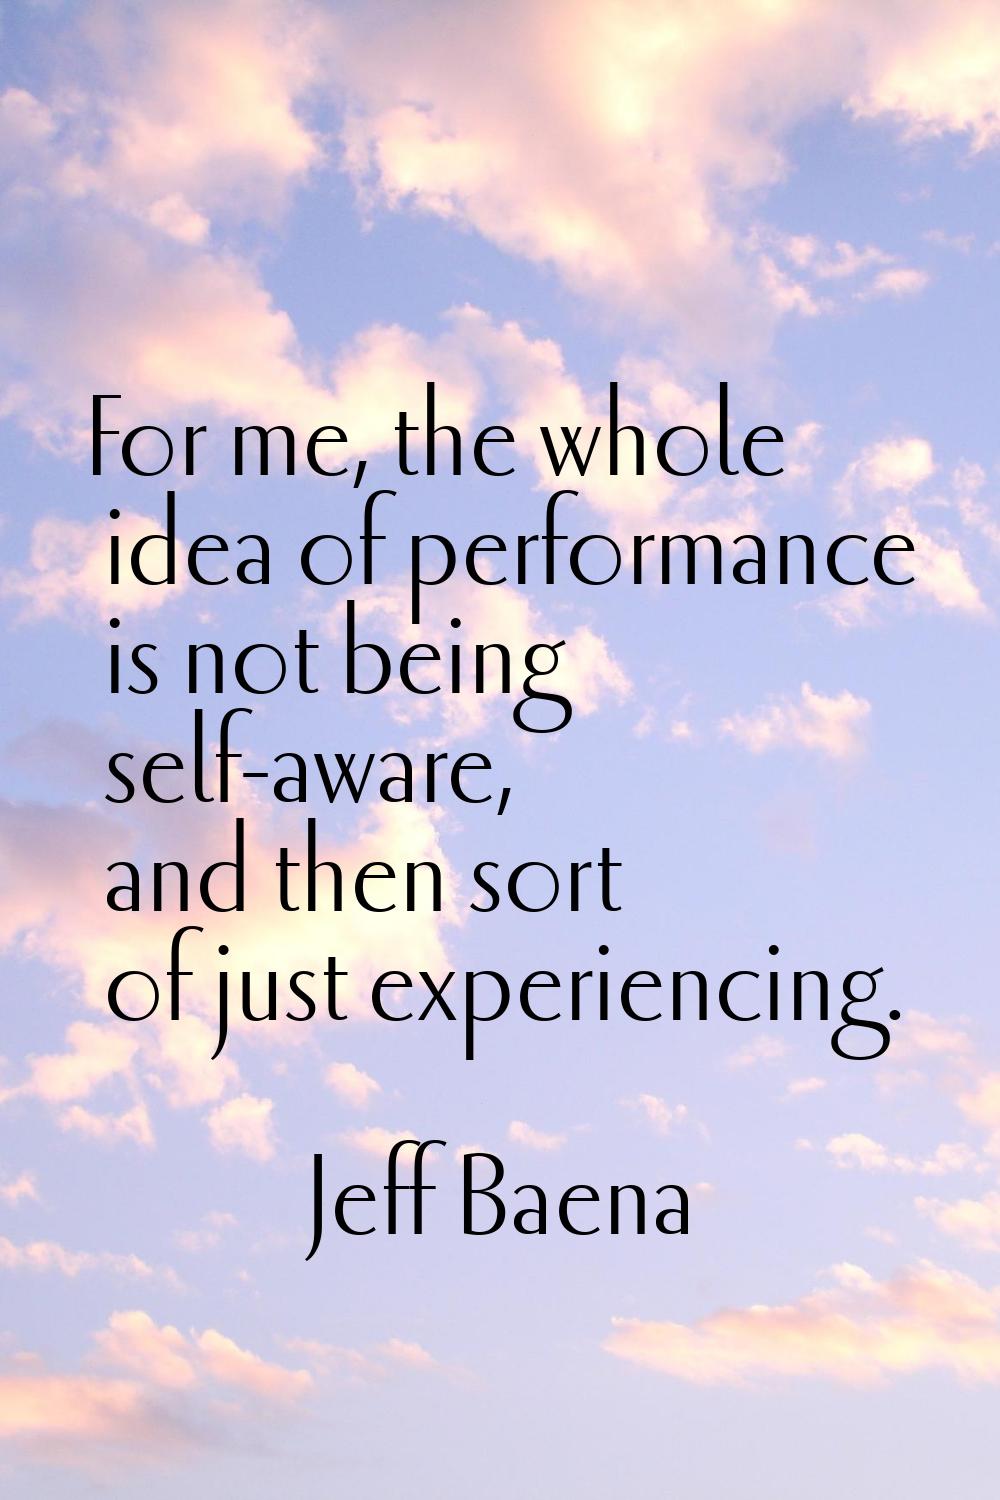 For me, the whole idea of performance is not being self-aware, and then sort of just experiencing.